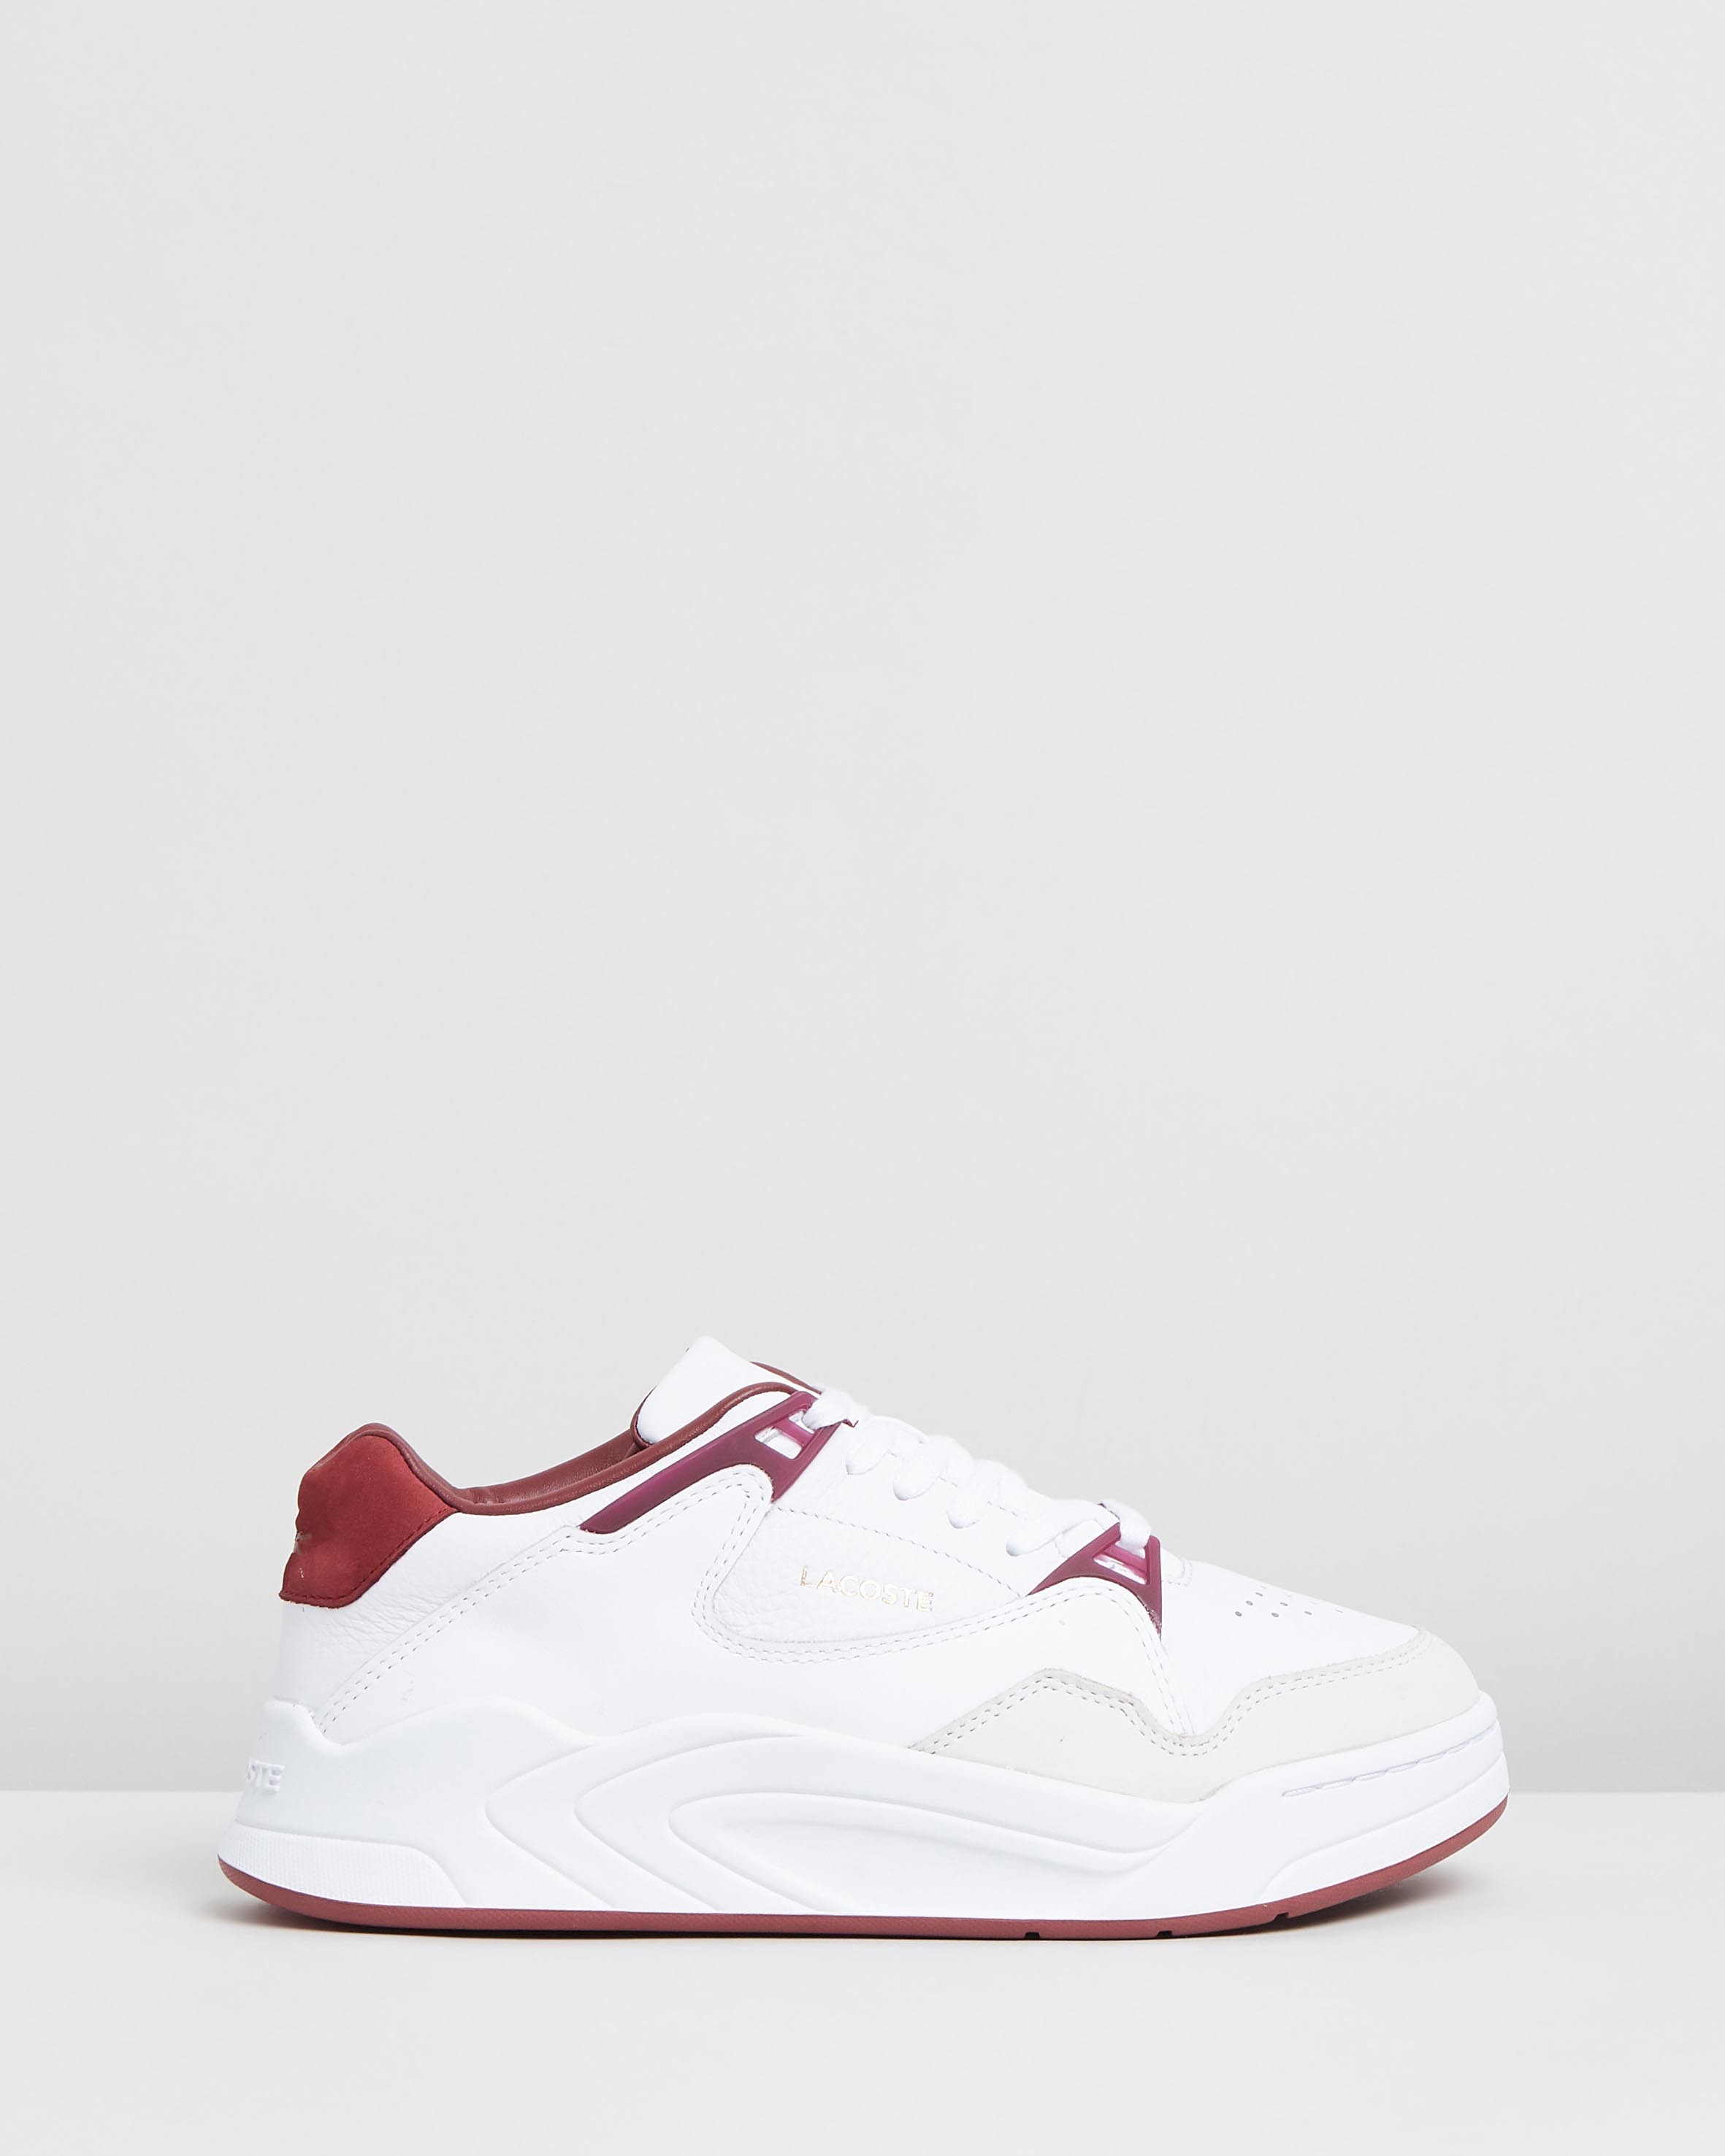 lacoste white sneakers womens